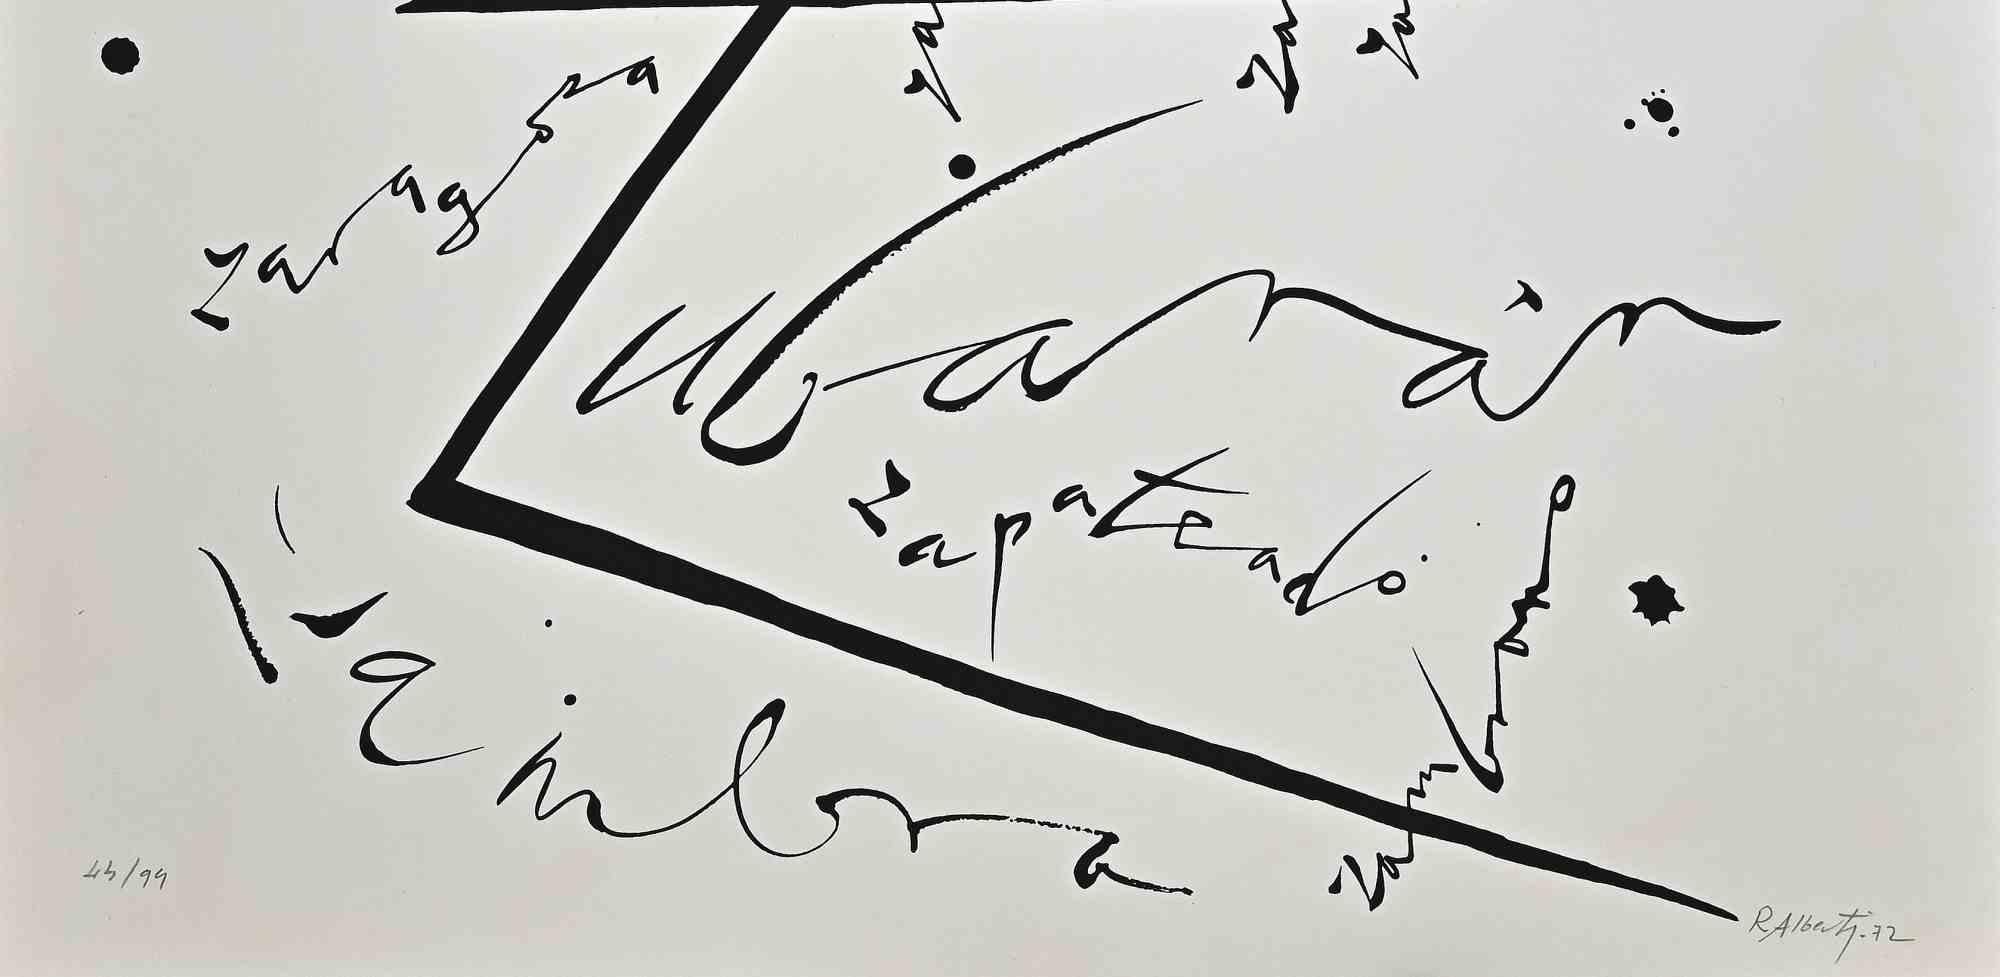 Letter Z   from Alphabet series is an original lithograph realized by Rafael Alberti in 1972.

Hand-signed and dated on the lower margin.

Numbered on the lower margin. Edition 44/99

Good conditions

The artwork represents alphabet letter Z, with a